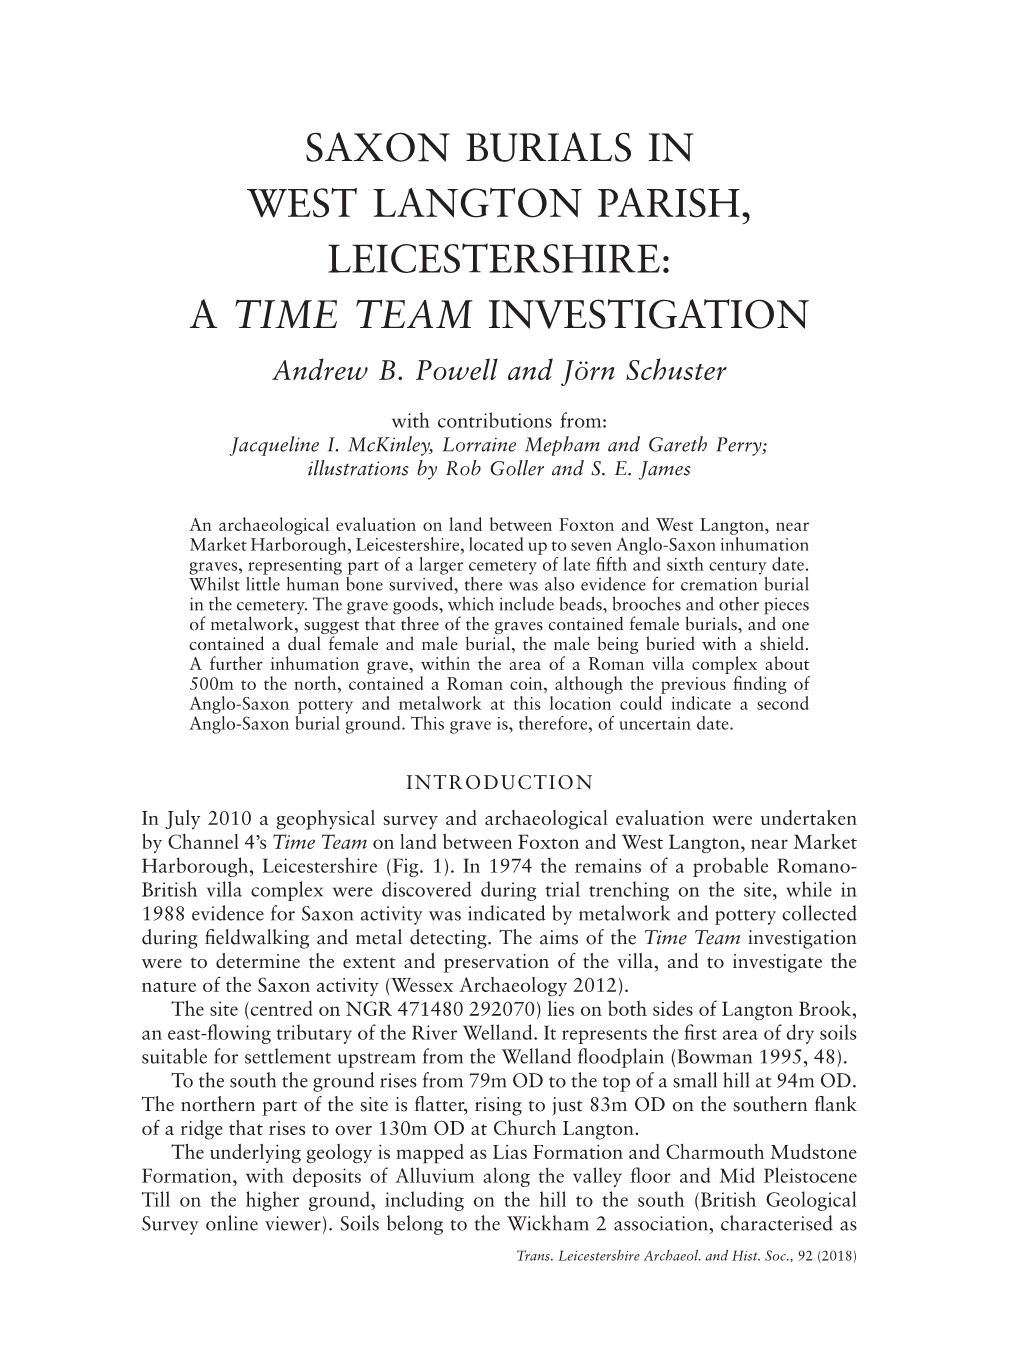 SAXON BURIALS in WEST LANGTON PARISH, LEICESTERSHIRE: a TIME TEAM INVESTIGATION Andrew B